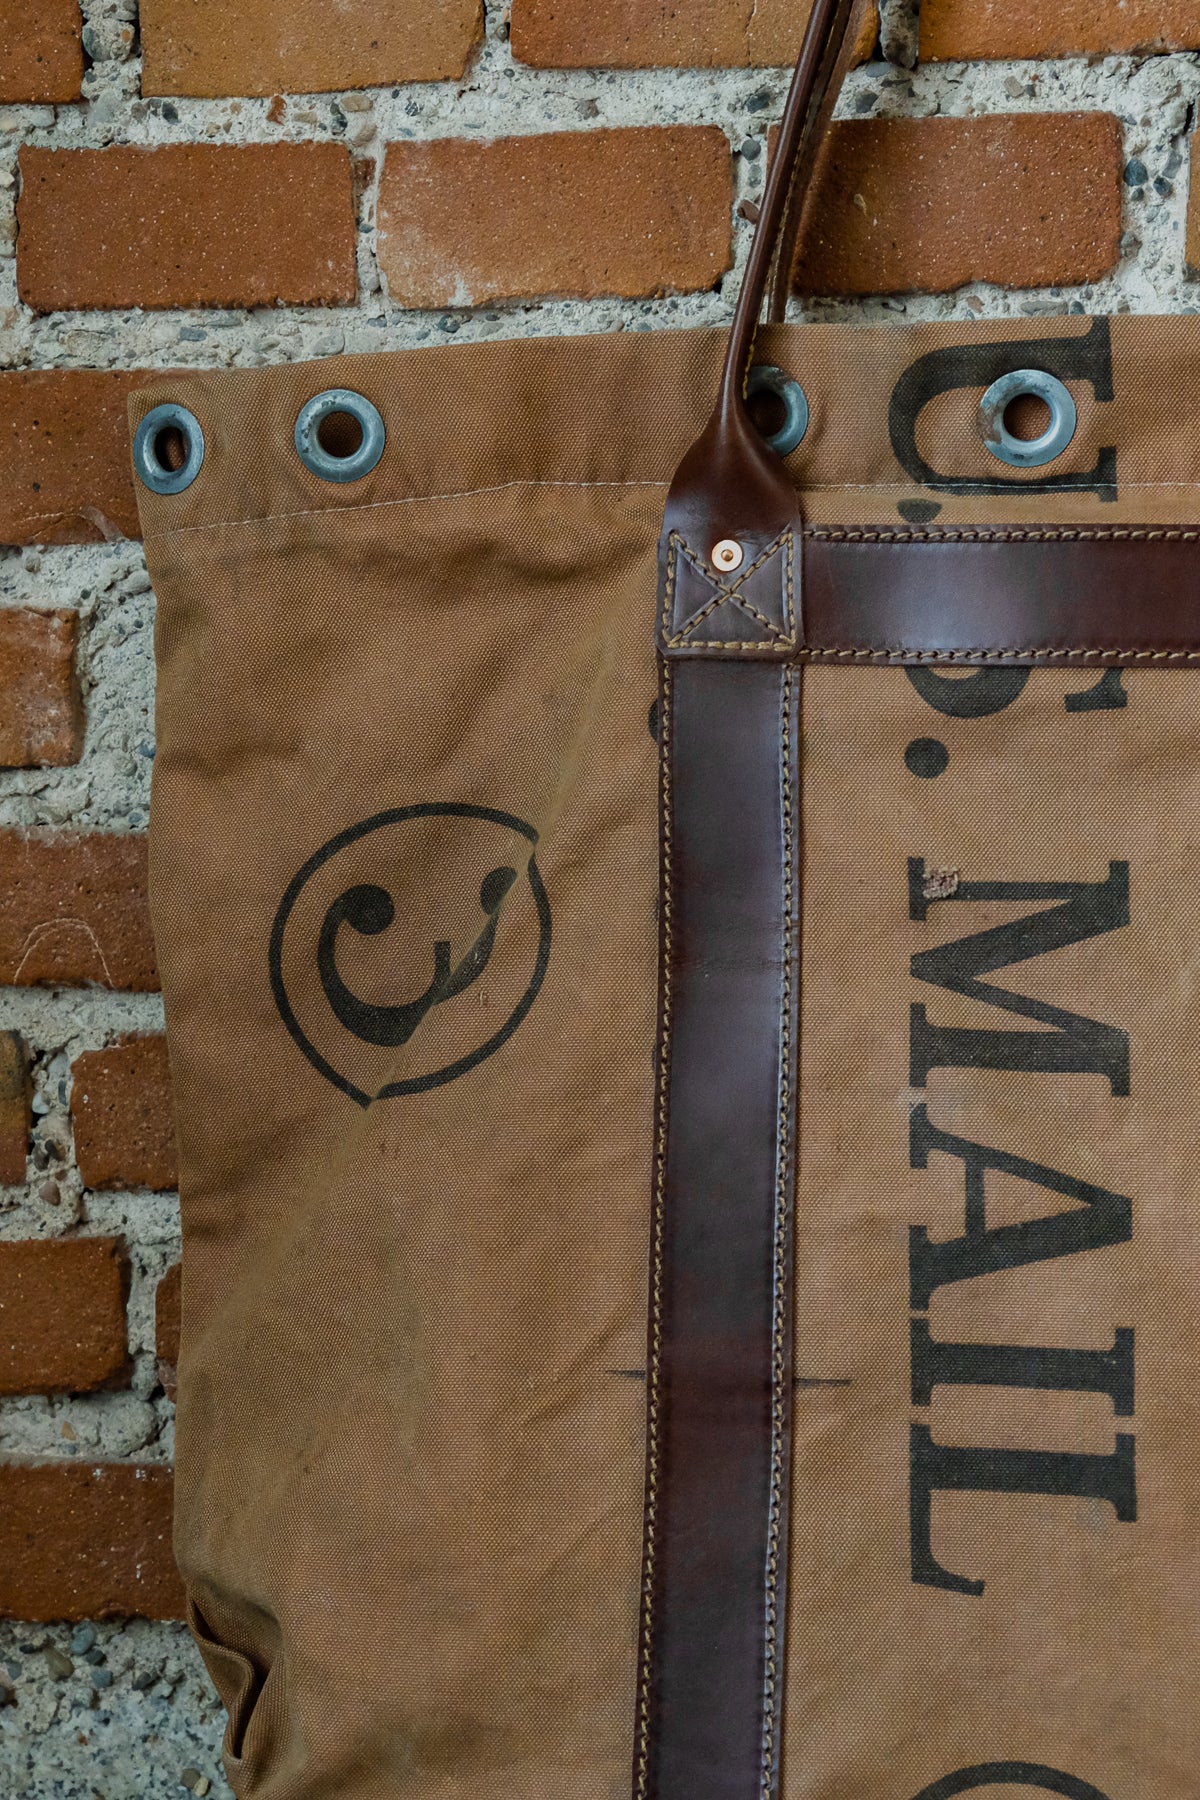 Actawl x The Rugged Society - Reworked Vintage US Mail Heavy Canvas Tote Carrier Bag